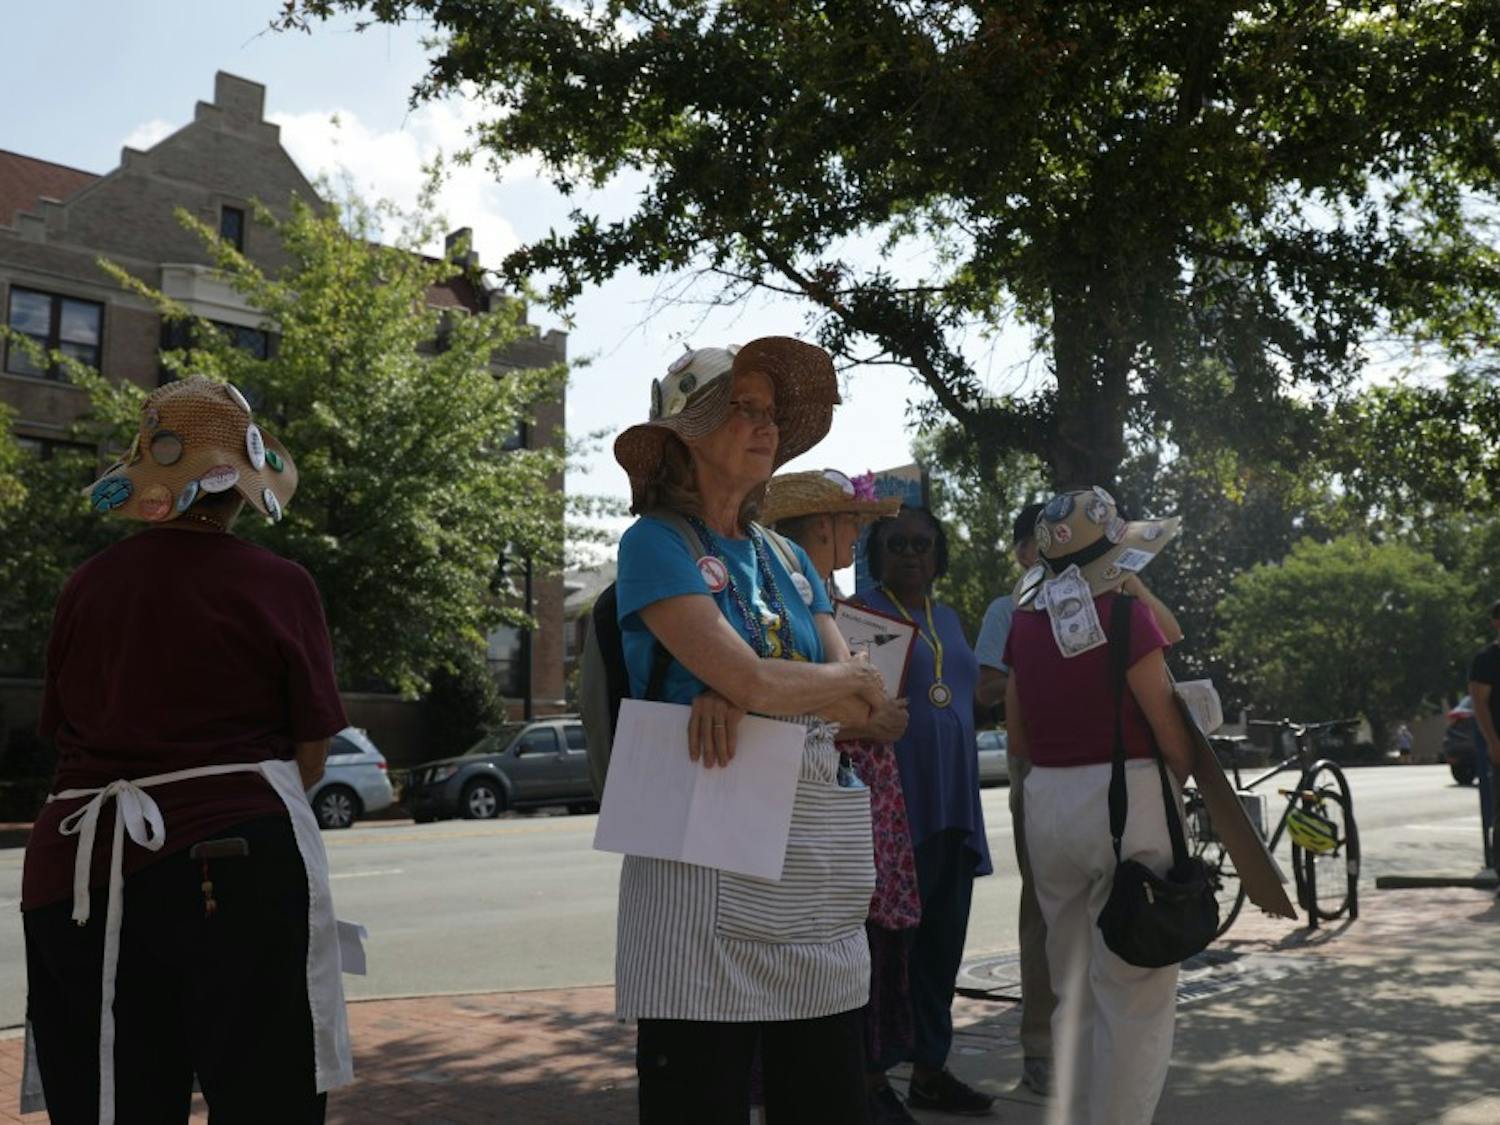 Members of the Raging Grannies, a local activist group, made an appearance at an NAACP rally in &nbsp;front of the old post office on Franklin St. Wednesday afternoon.